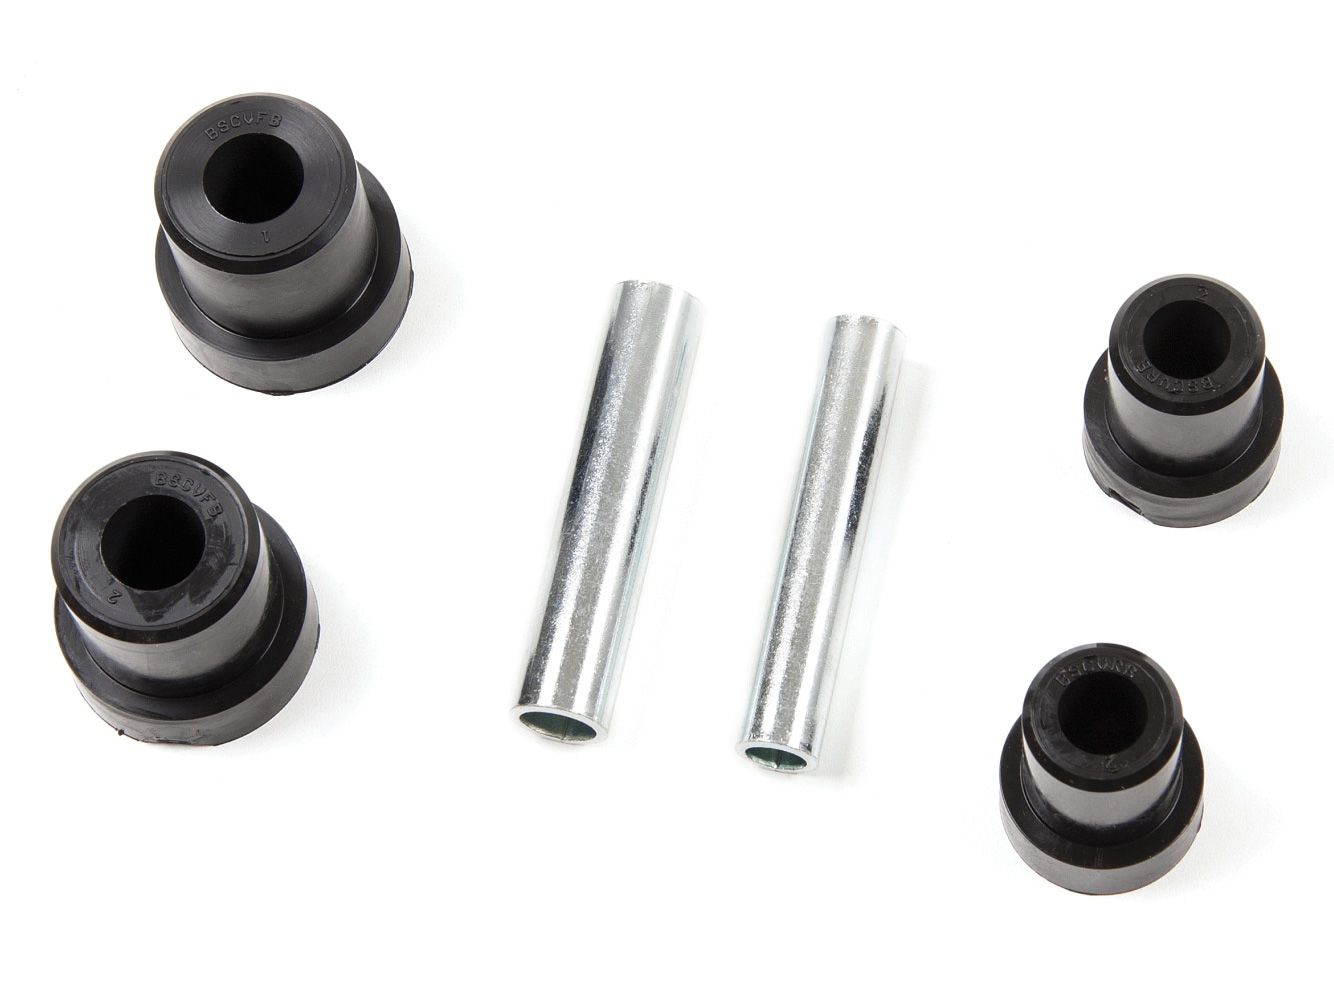 Blazer & Suburban 1/2, 3/4 ton 1973-1987 Chevy 4WD Front Leaf Spring Bushing Kit by Zone Off-Road